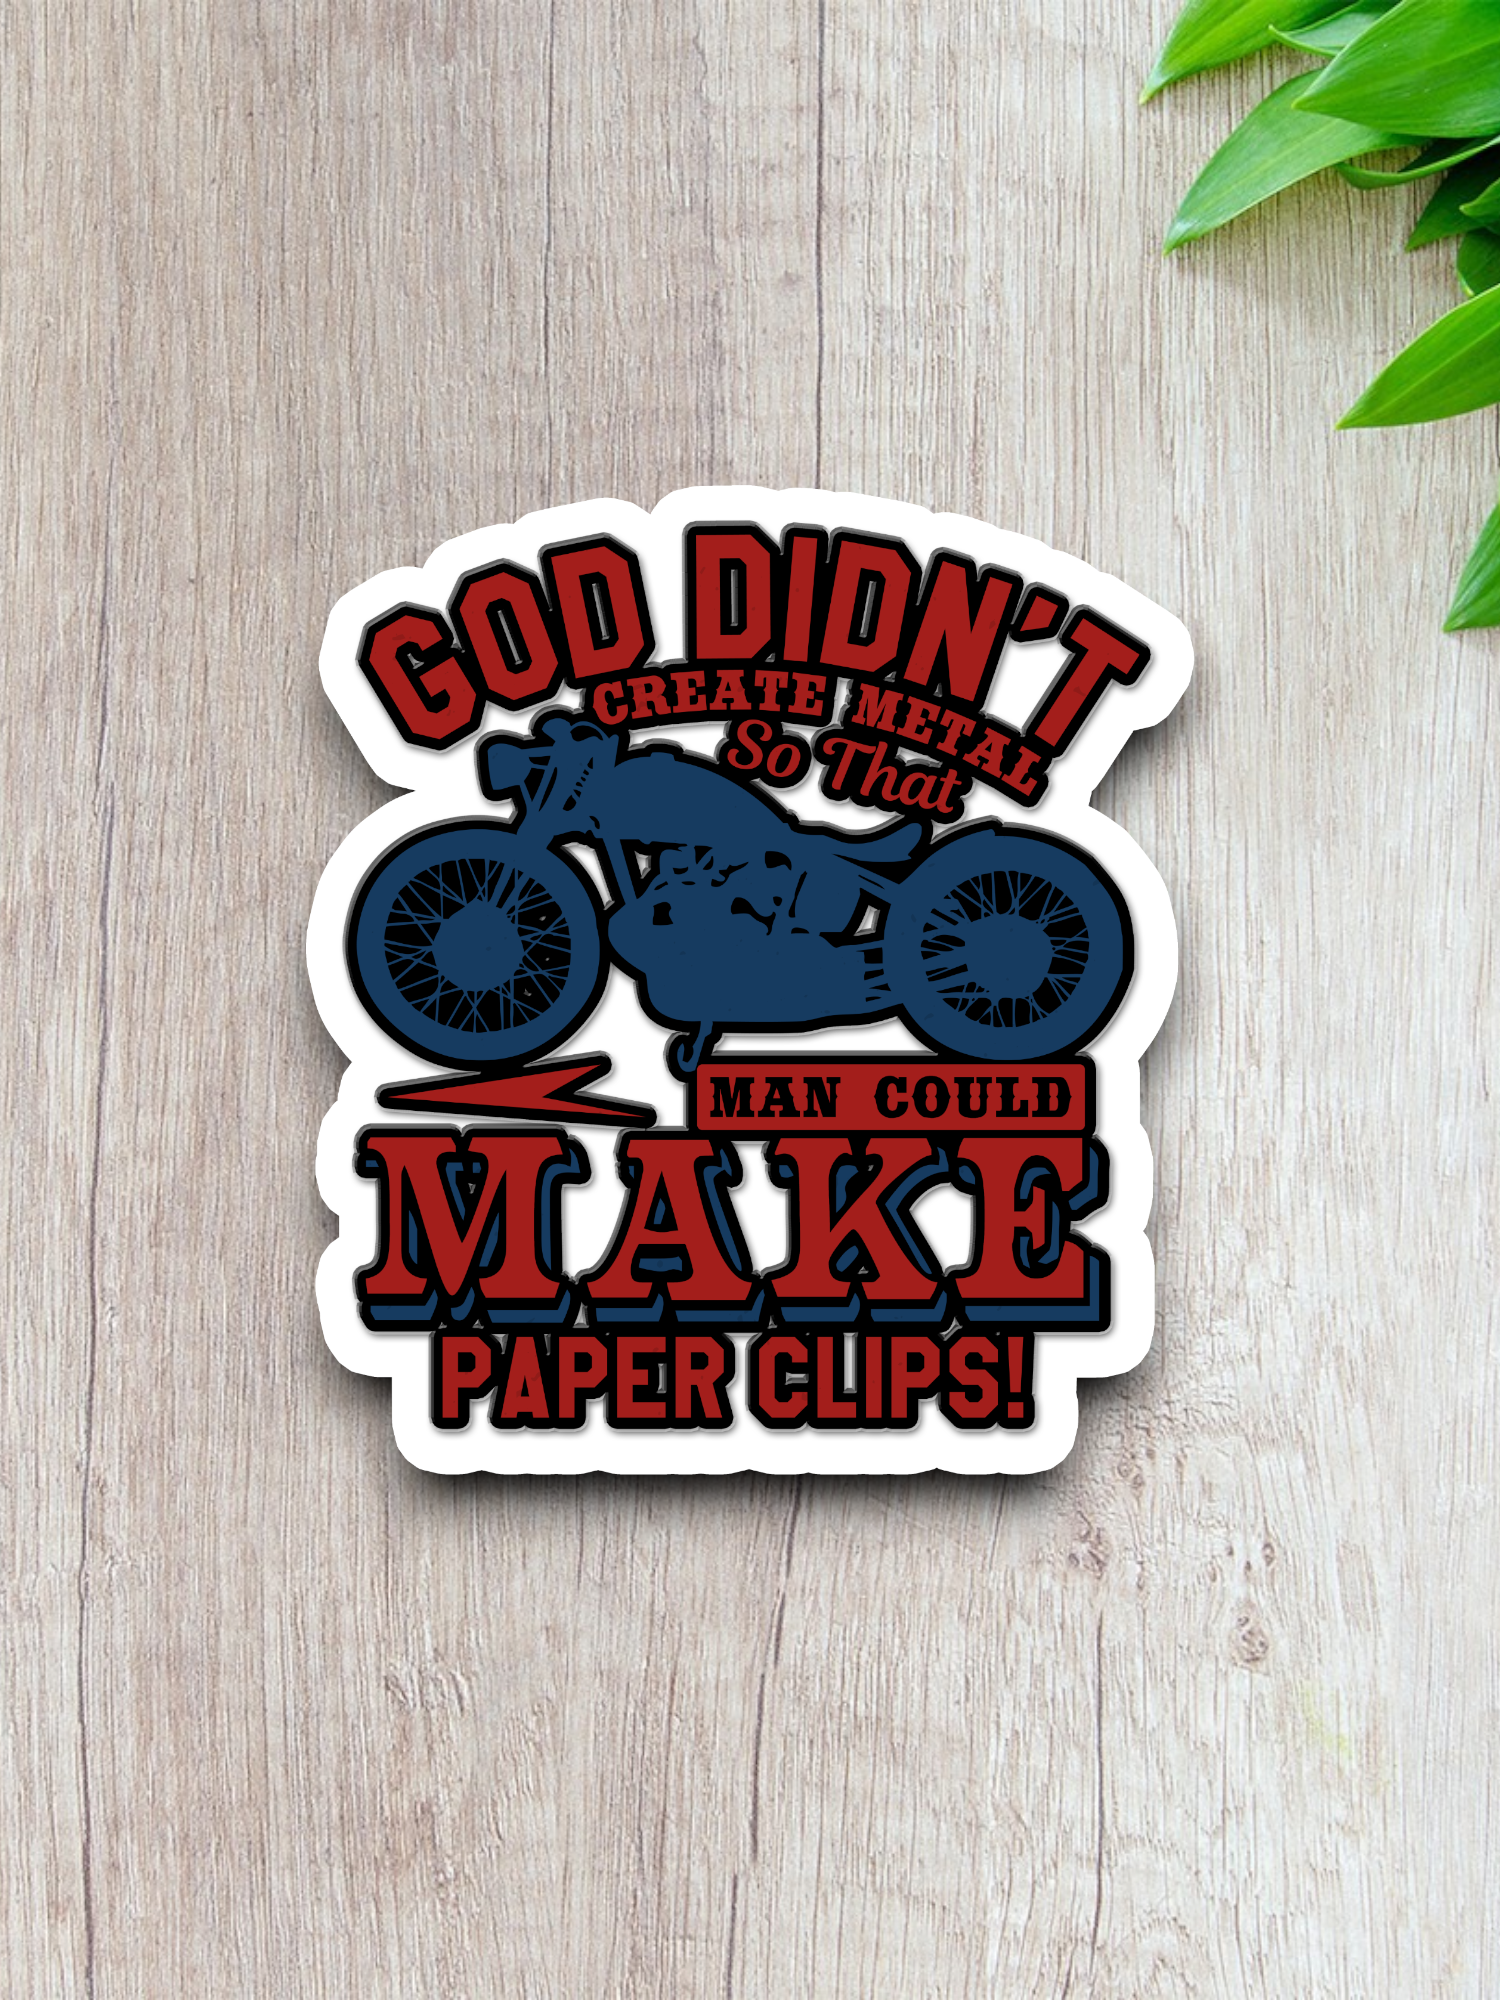 God Didn't Create Metal So That Man Could Make paperclips - Faith Sticker